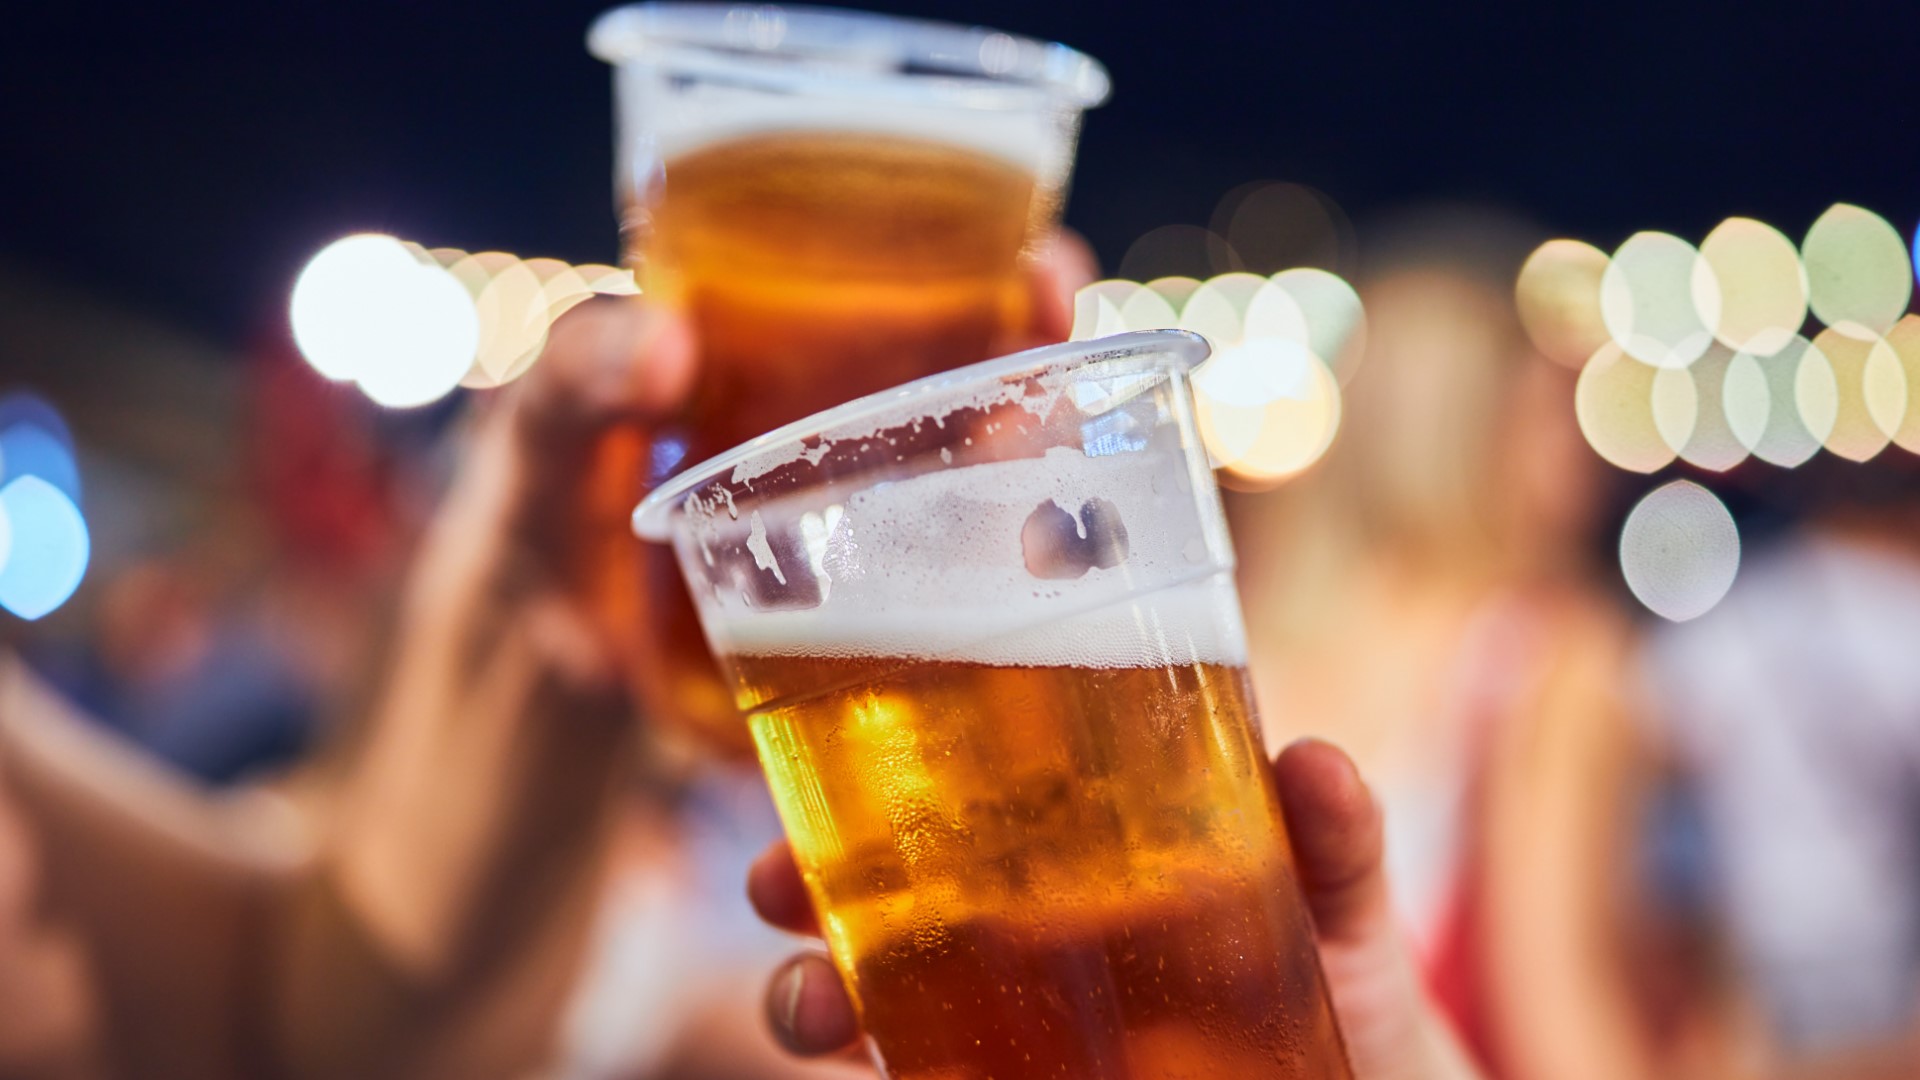 A new North Carolina law has eased restrictions on where people can carry alcoholic beverages, including college sporting events.